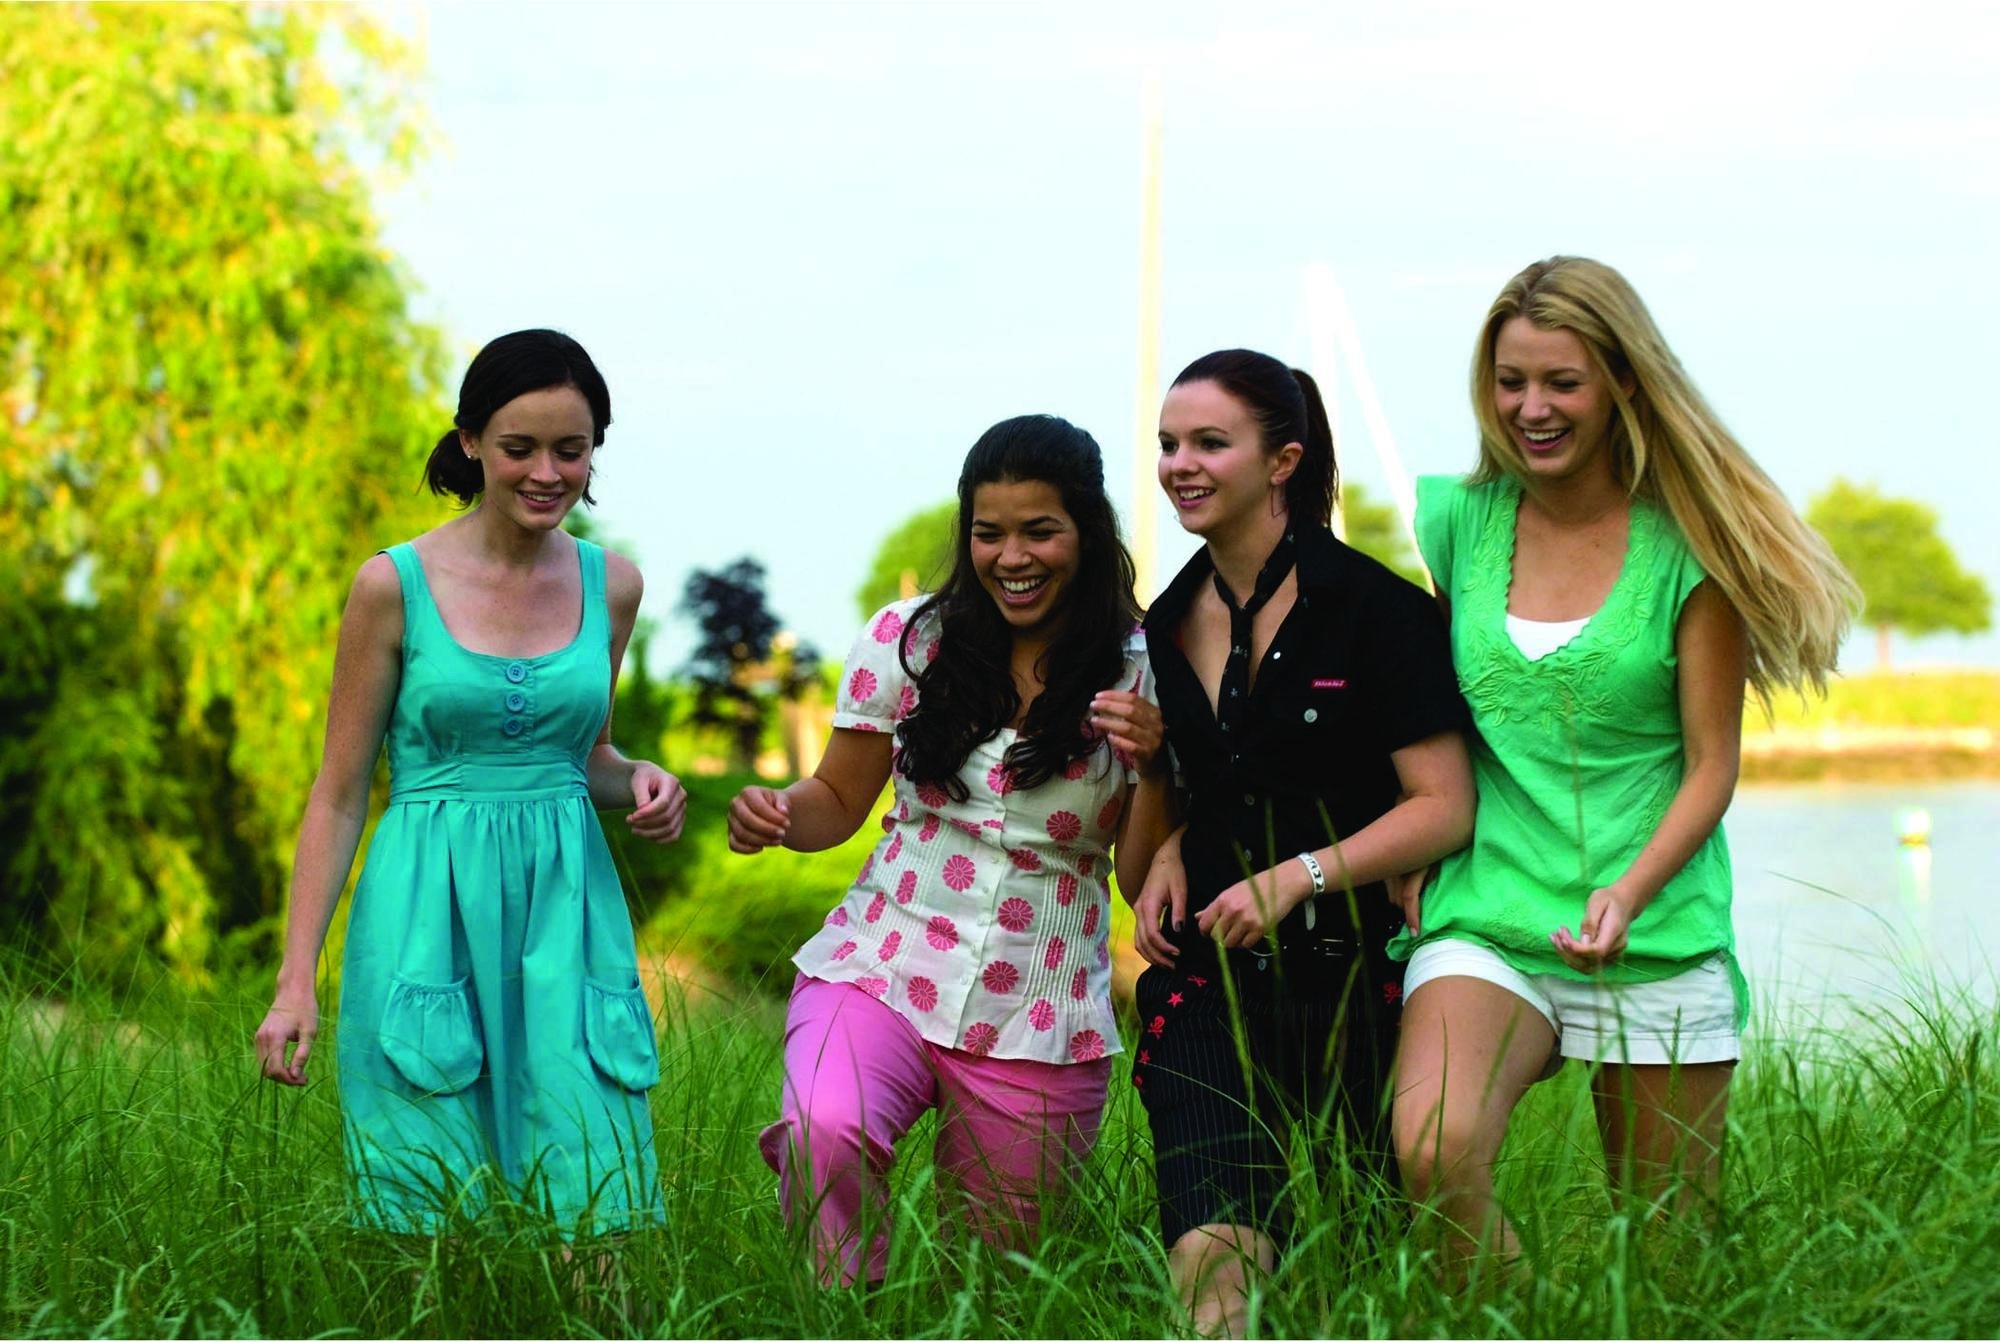 Still of Alexis Bledel, Blake Lively, Amber Tamblyn and America Ferrera in The Sisterhood of the Traveling Pants 2 (2008)